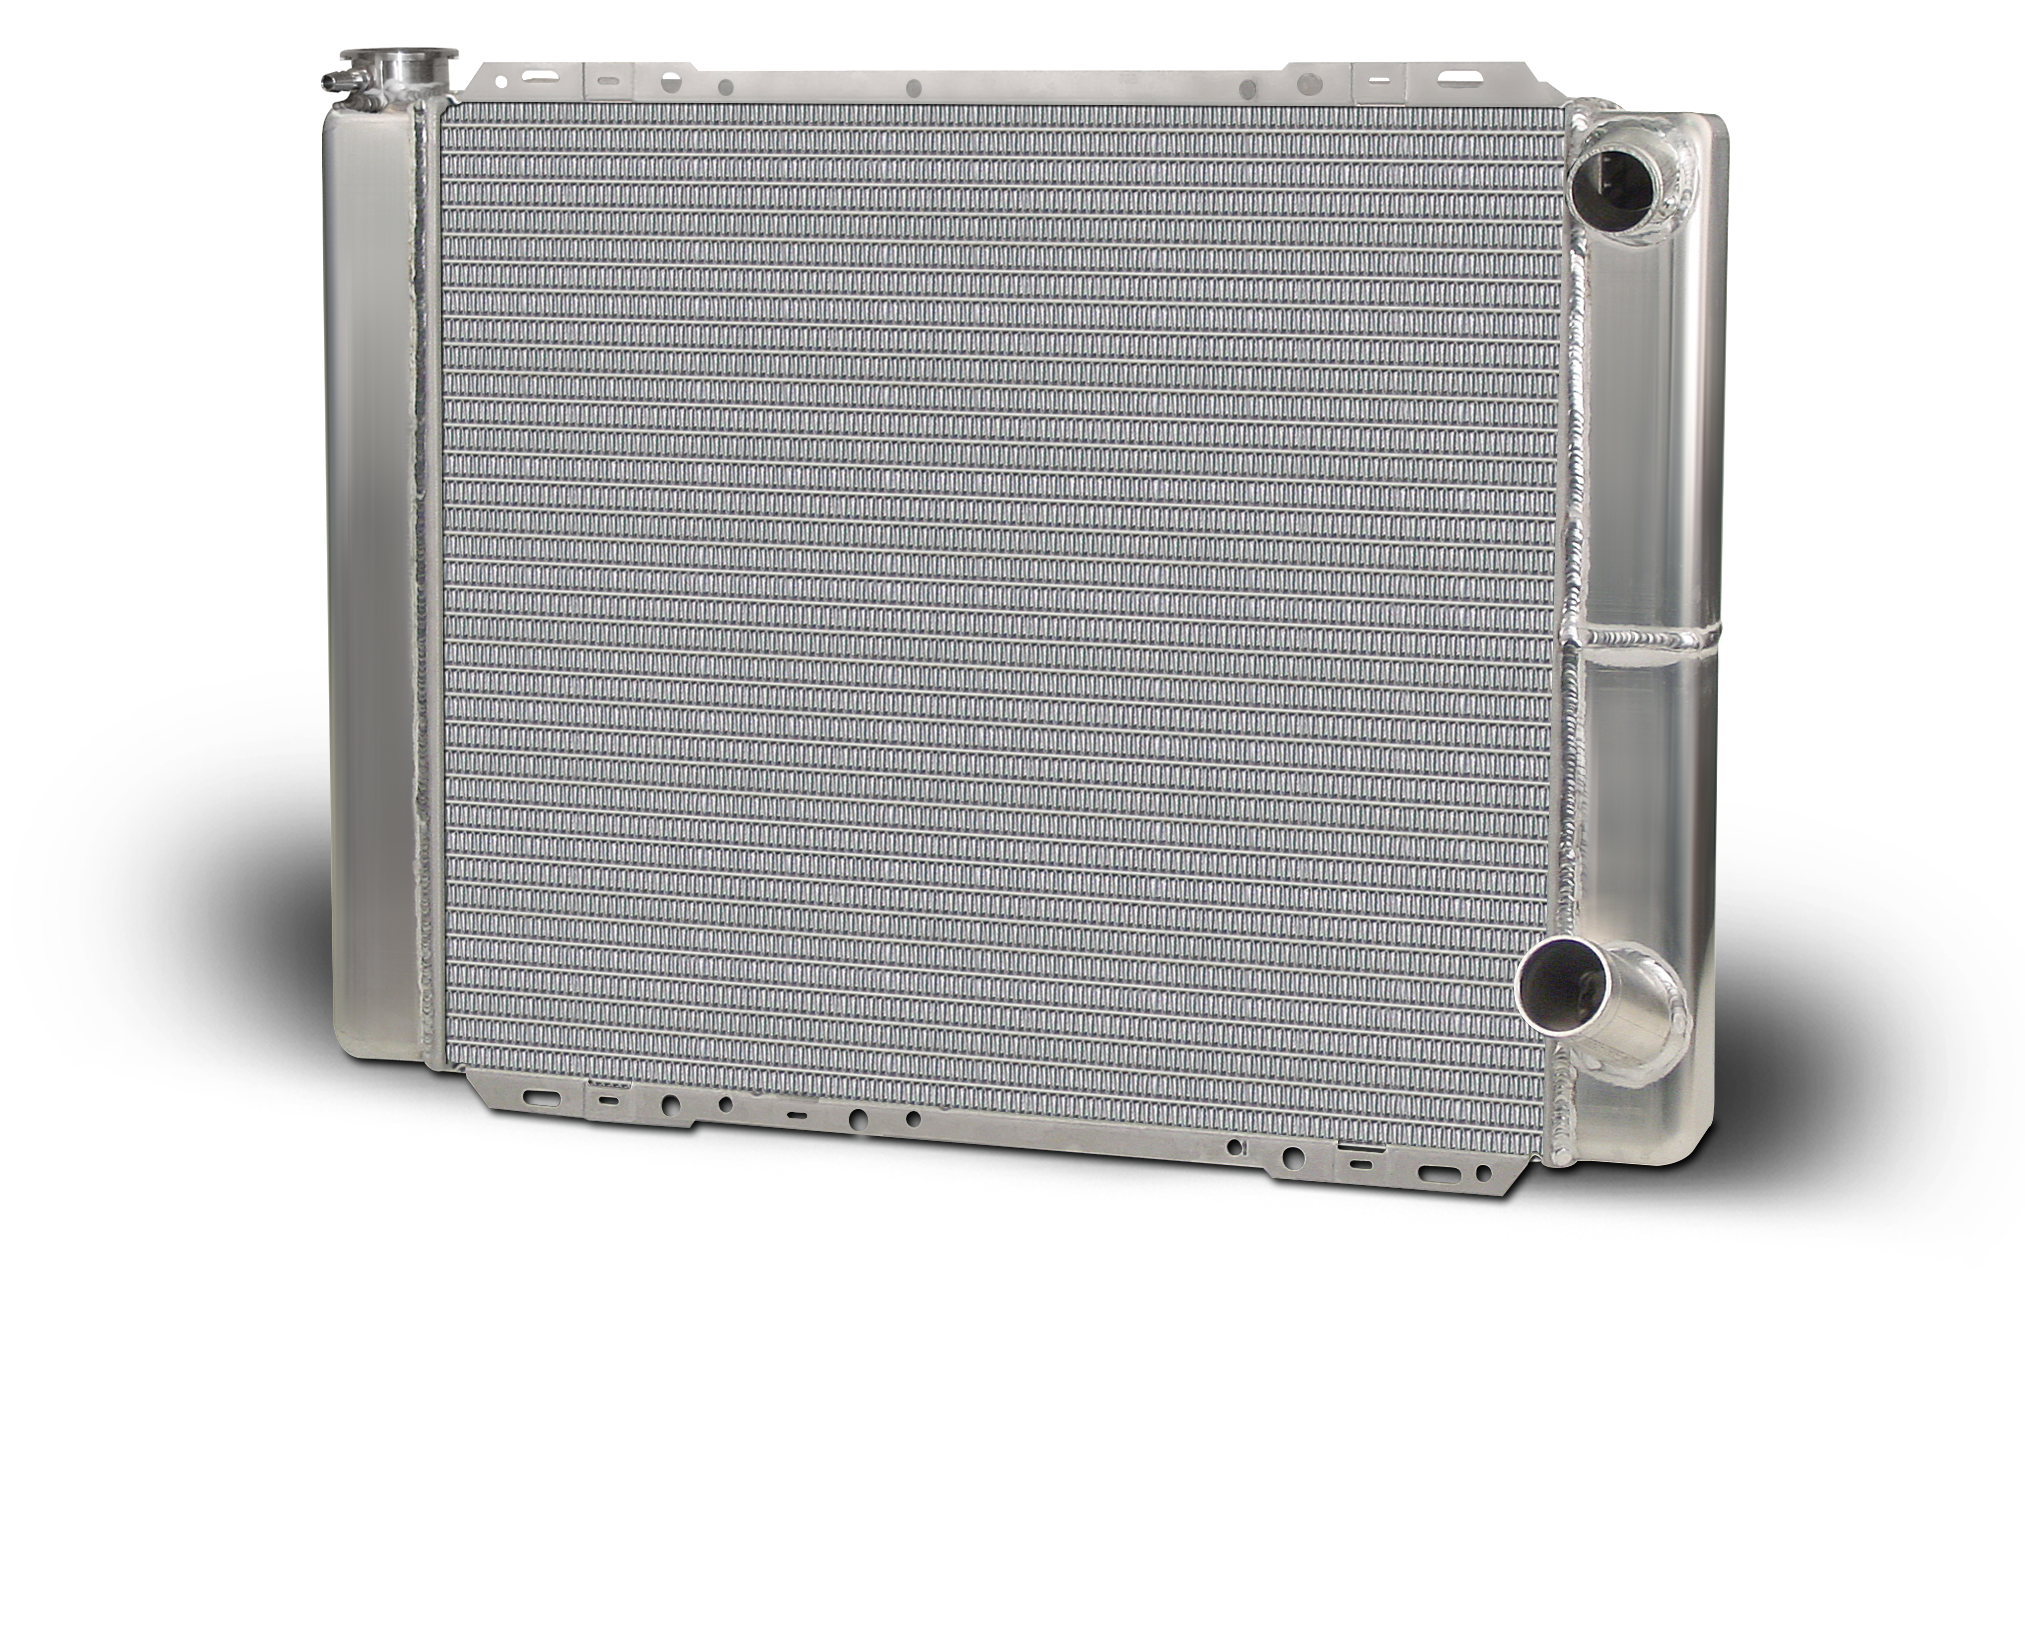 AFCO 28 Inch Double Pass Aluminum Radiator